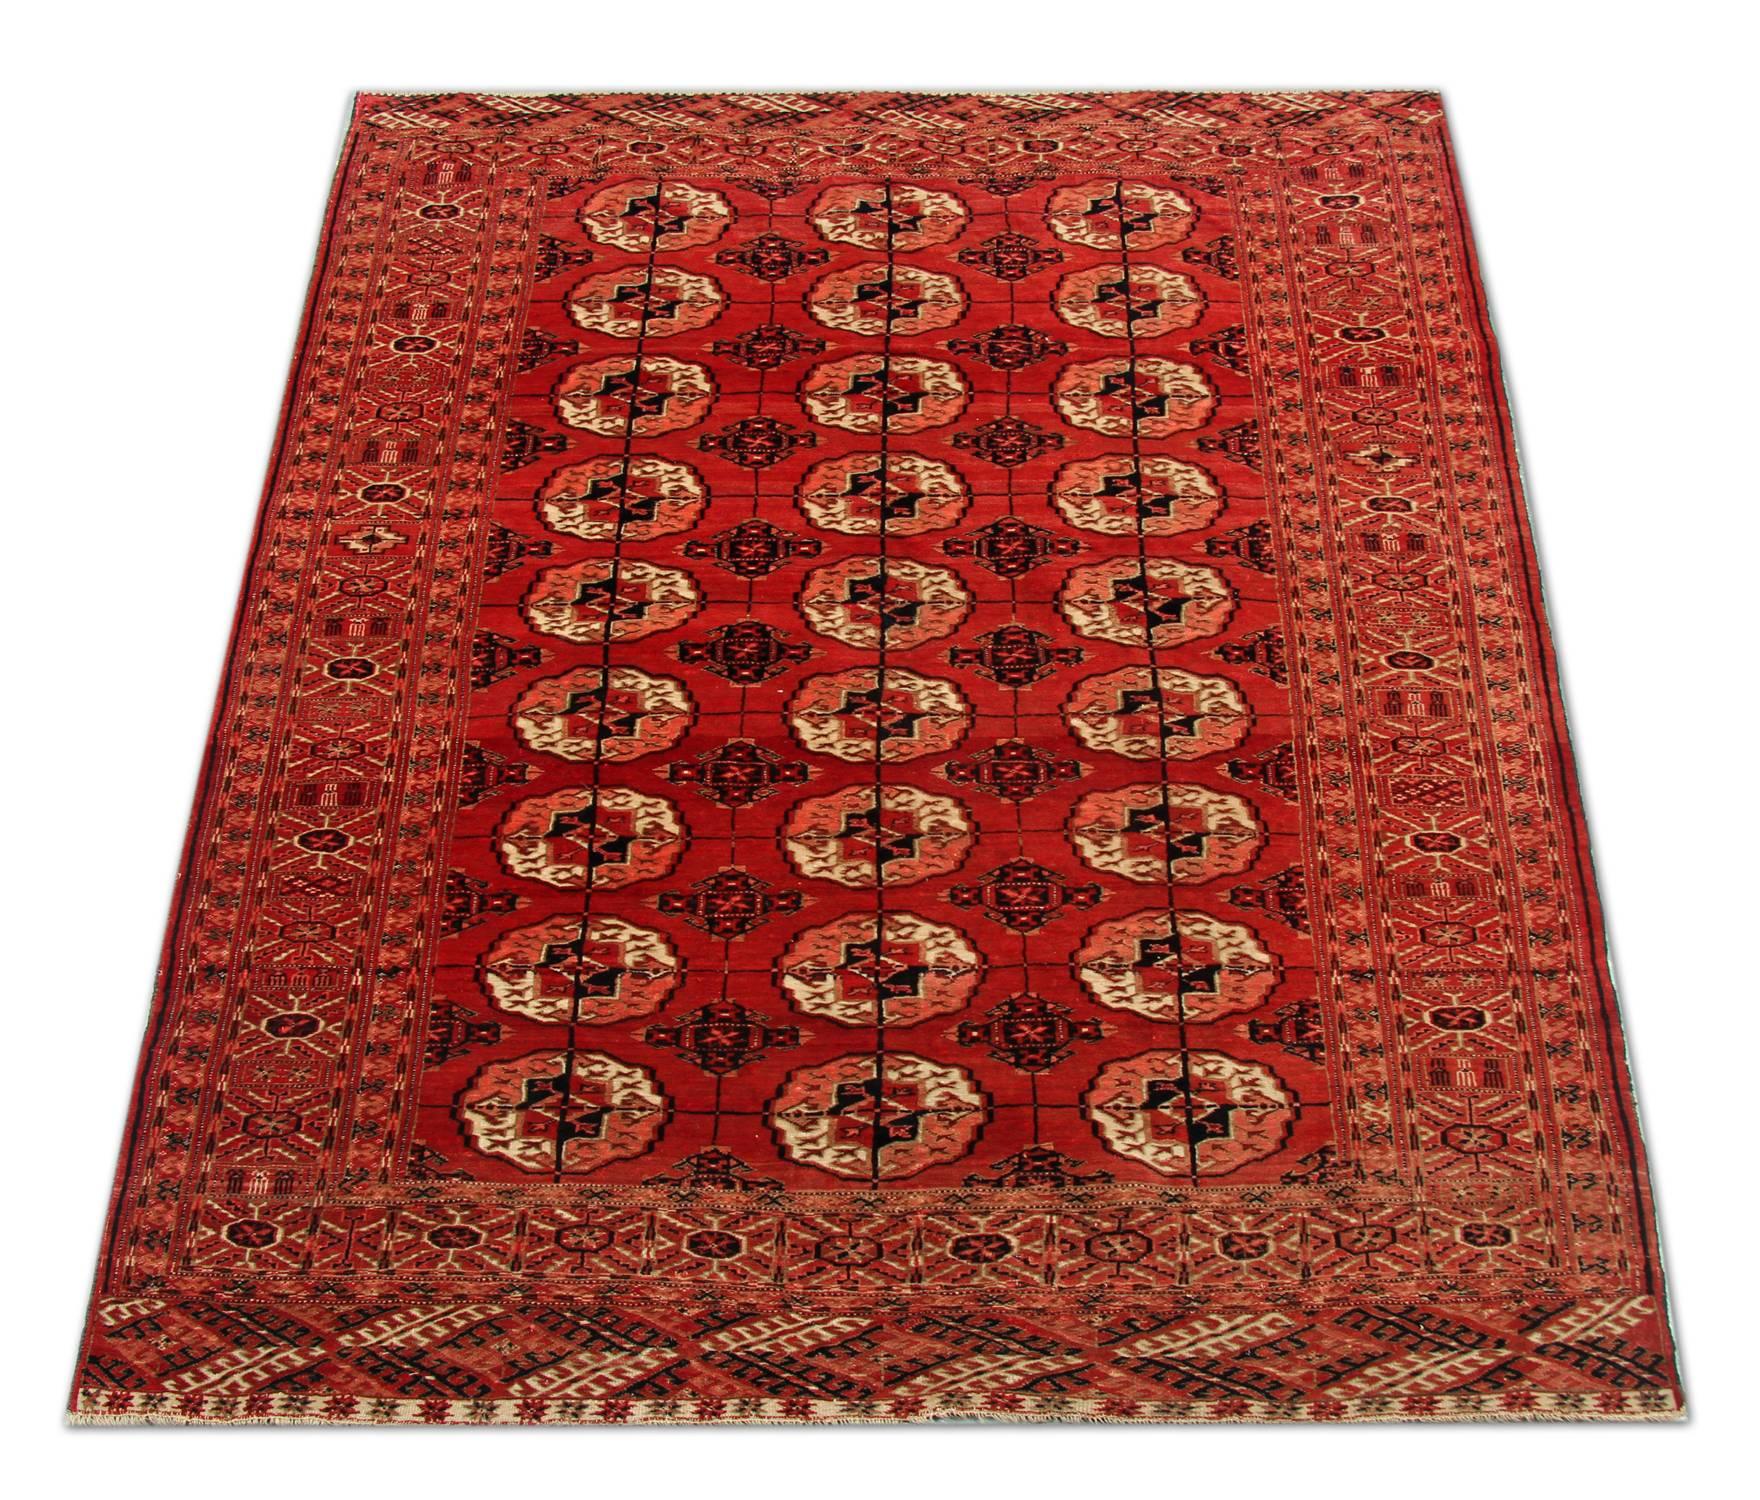 This is an example of fine Afghan red rug made by highly skilled Turkman handmade rugs weavers in the north of Afghanistan. They have used hand-spun wool and 100% organic dyes for the production of these wool rugs. This tribal rug has repeating